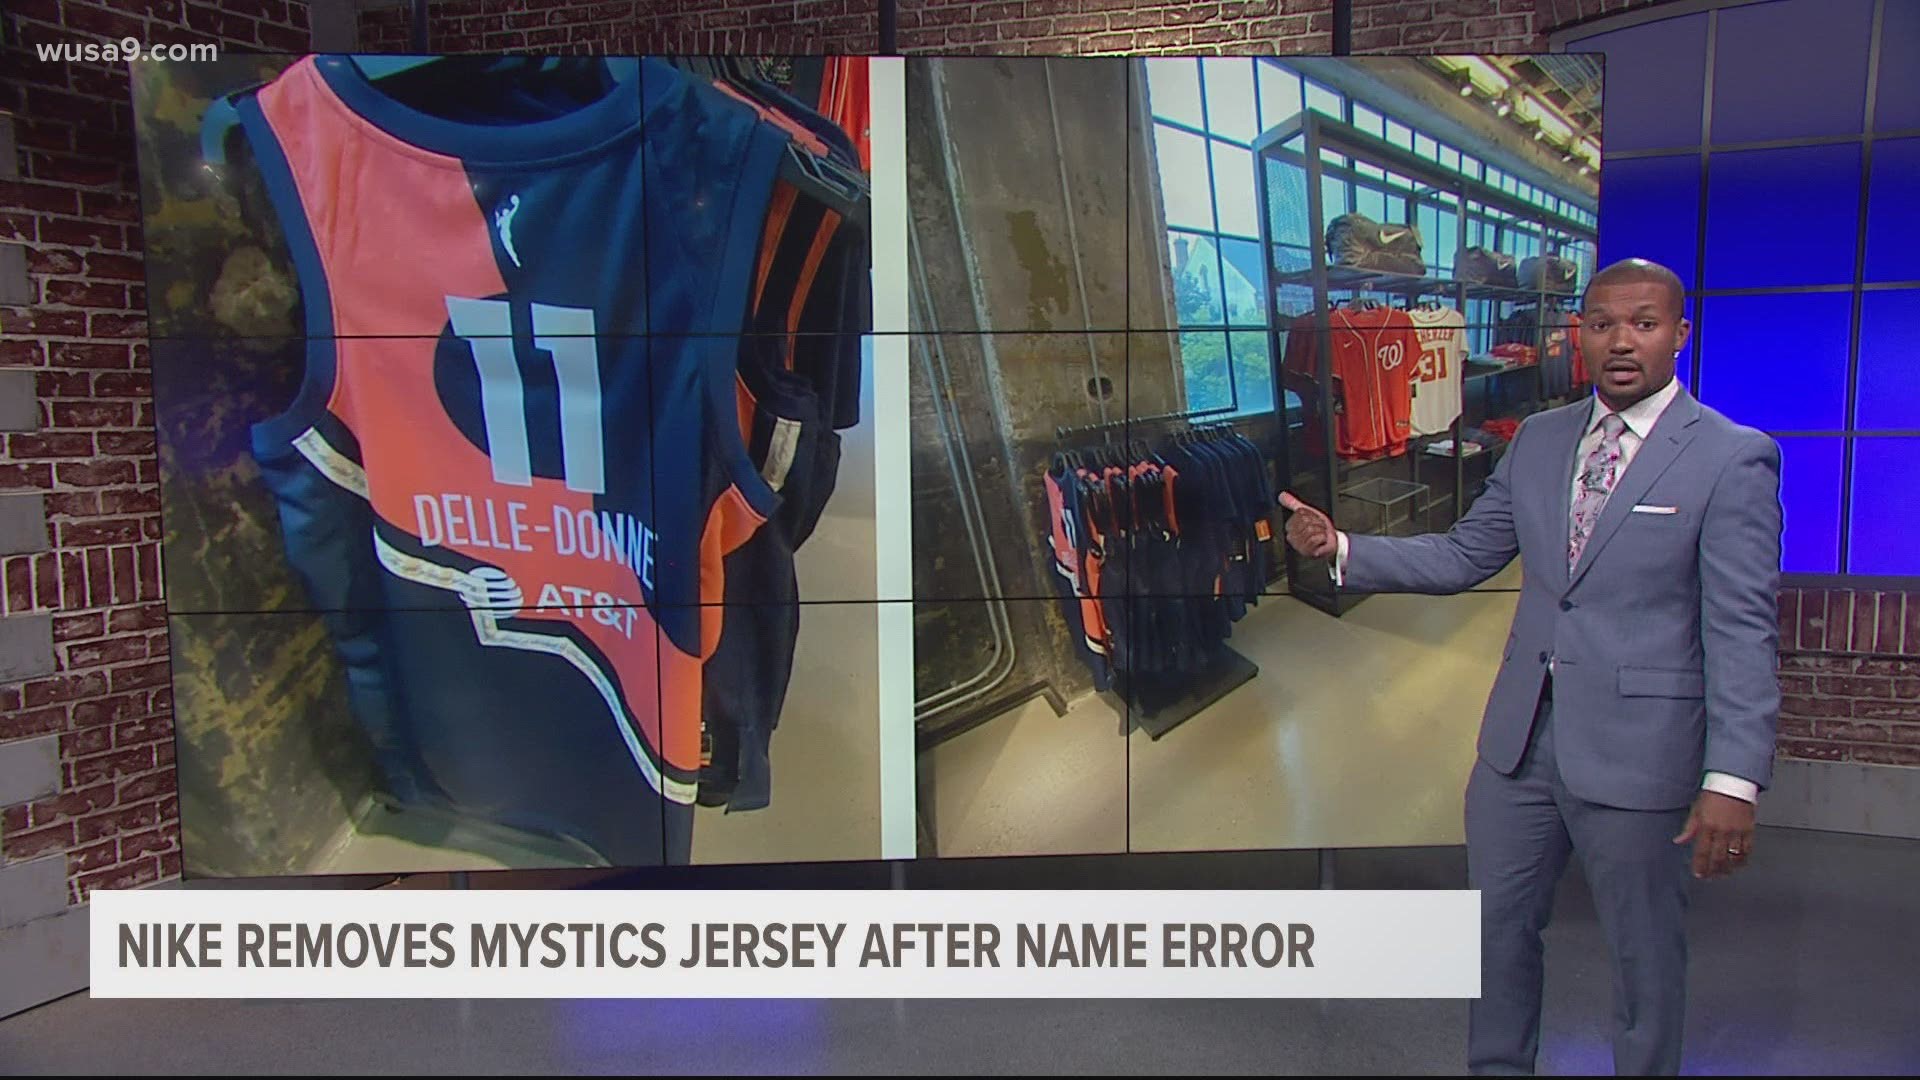 Elena Delle Donne is a two-time WNBA MVP but has had her name spelled incorrectly by NIKE in the new "RISE" line of jerseys being sold.